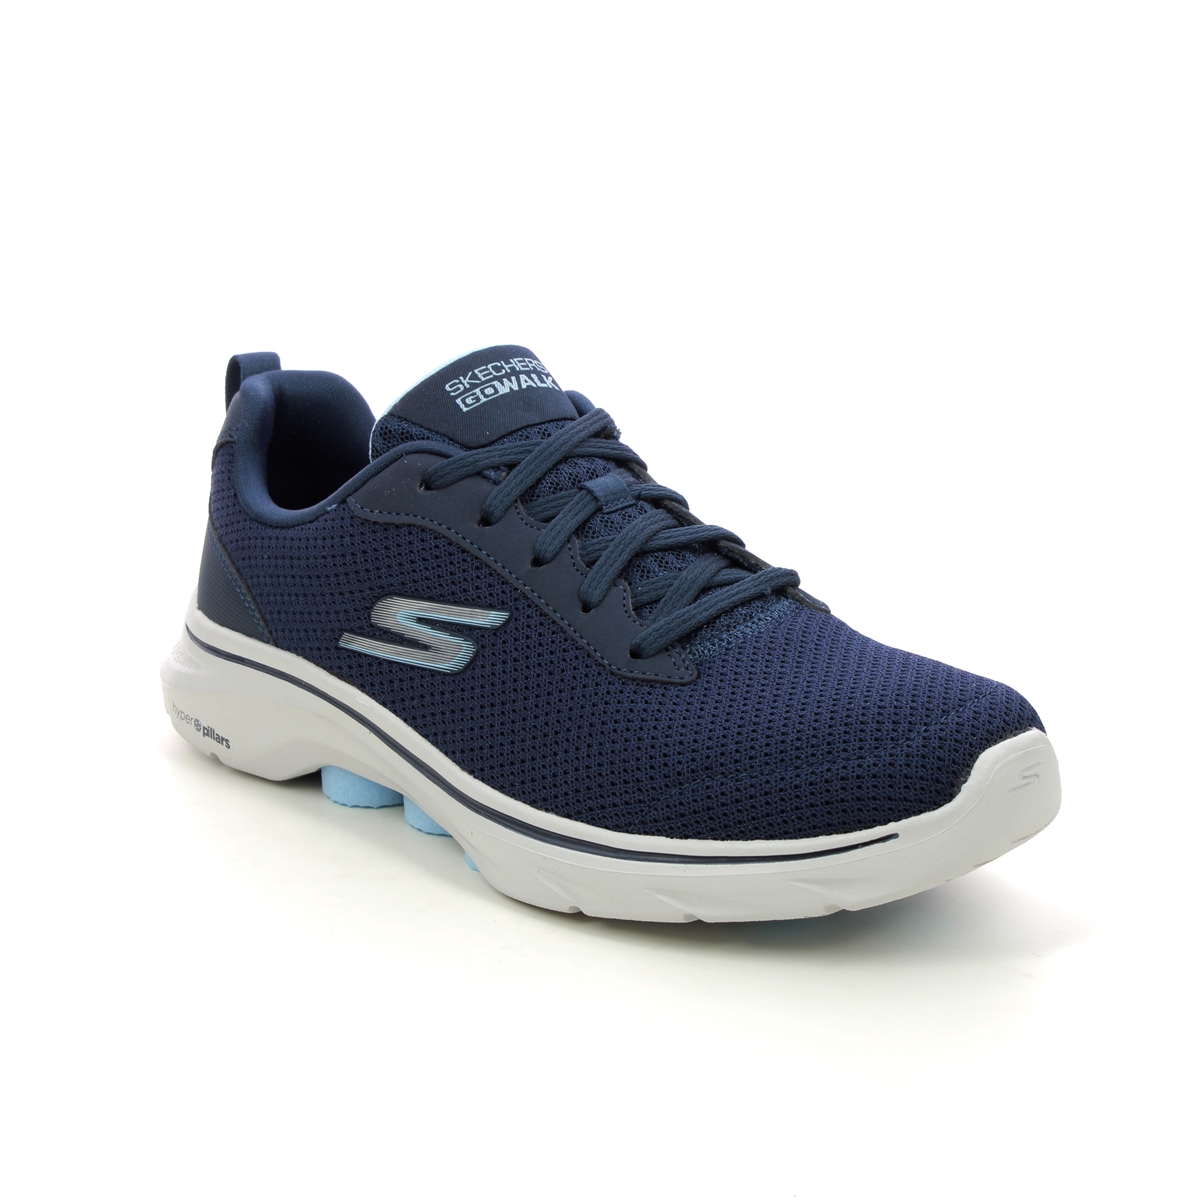 Skechers Go Walk 7 Lace NVLB Navy Light Blue Womens trainers 125207 in a Plain Textile in Size 7